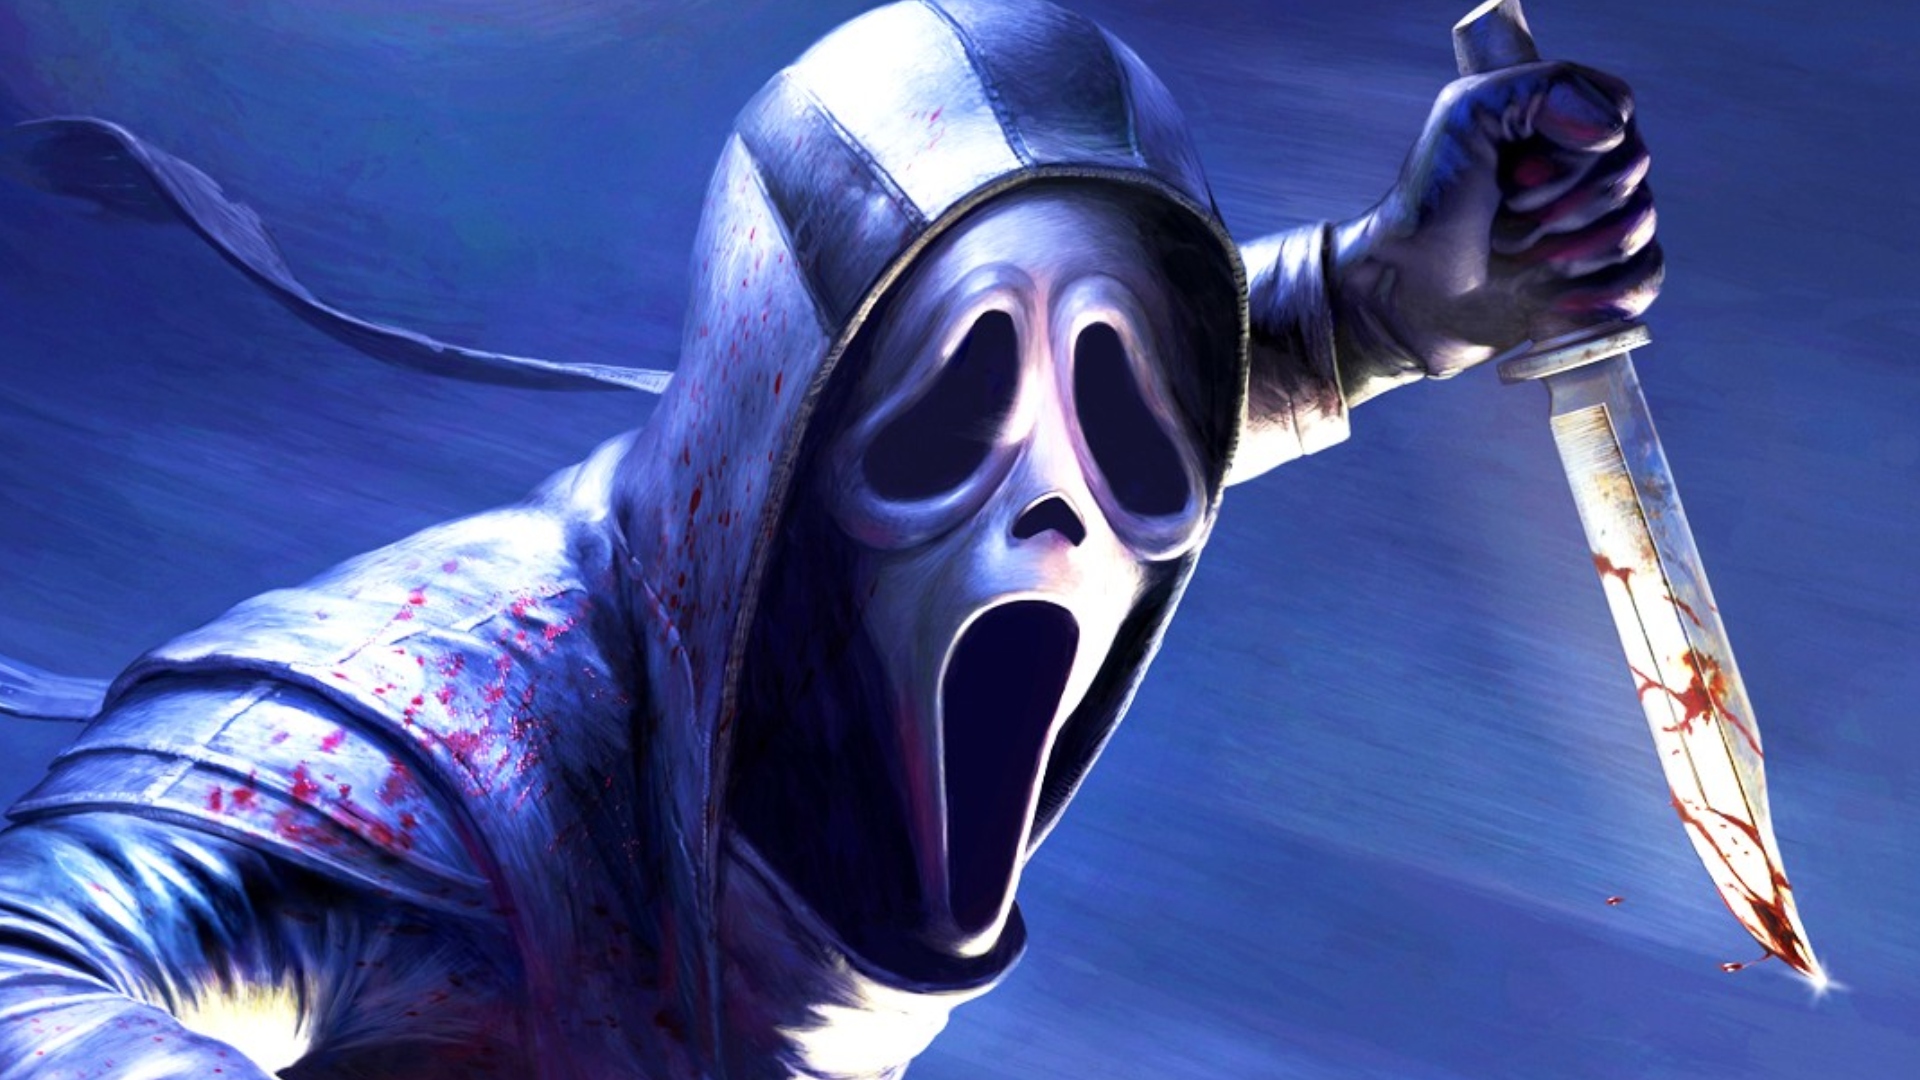 Dead by Daylight’s new terror radius is a big boost for accessibility